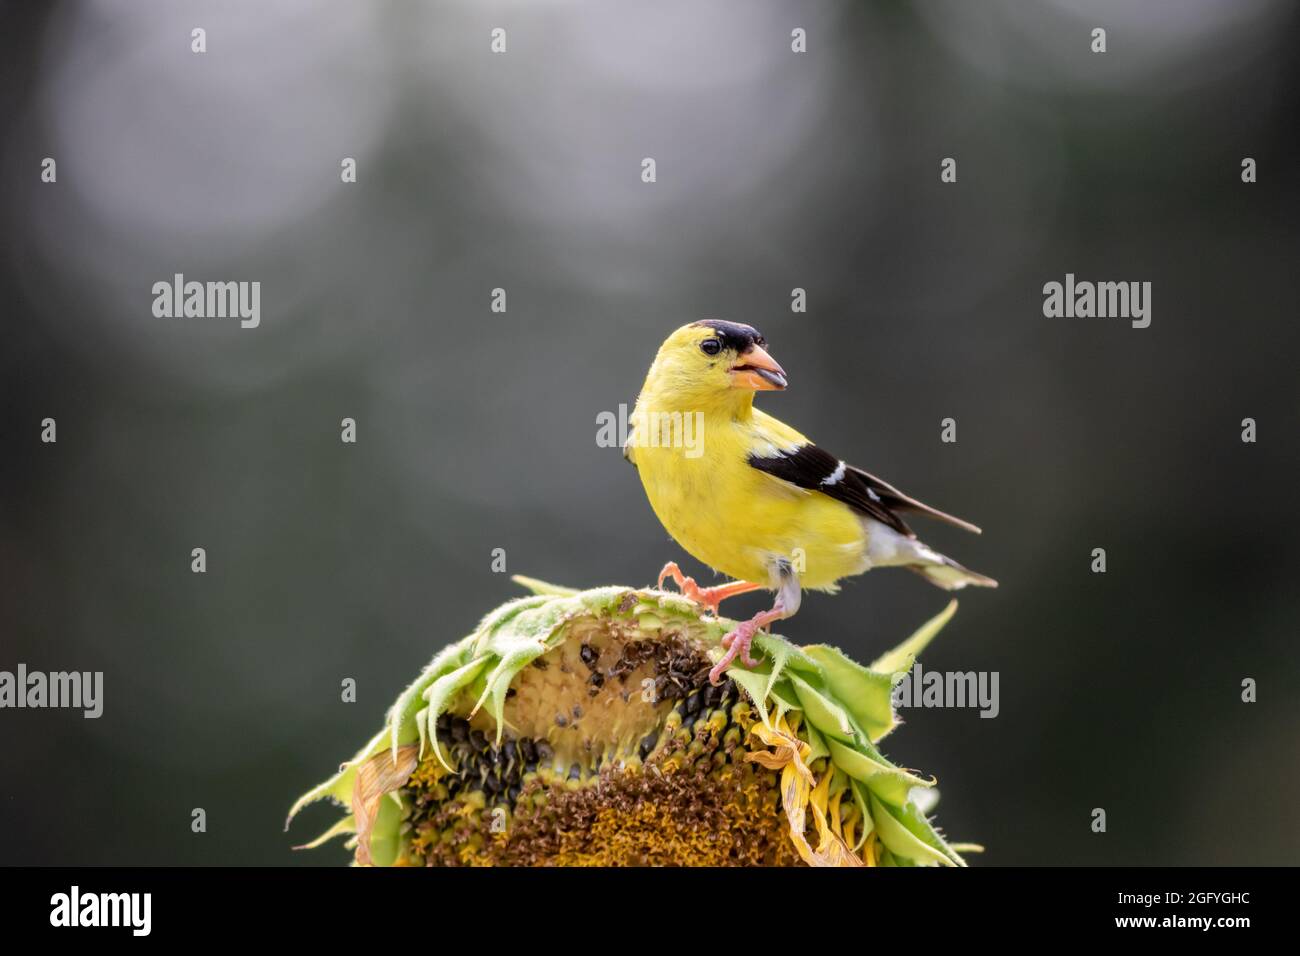 Eastern Goldfinch male (Carduelis tristis) on sunflower with dark dramatic bokeh background Stock Photo